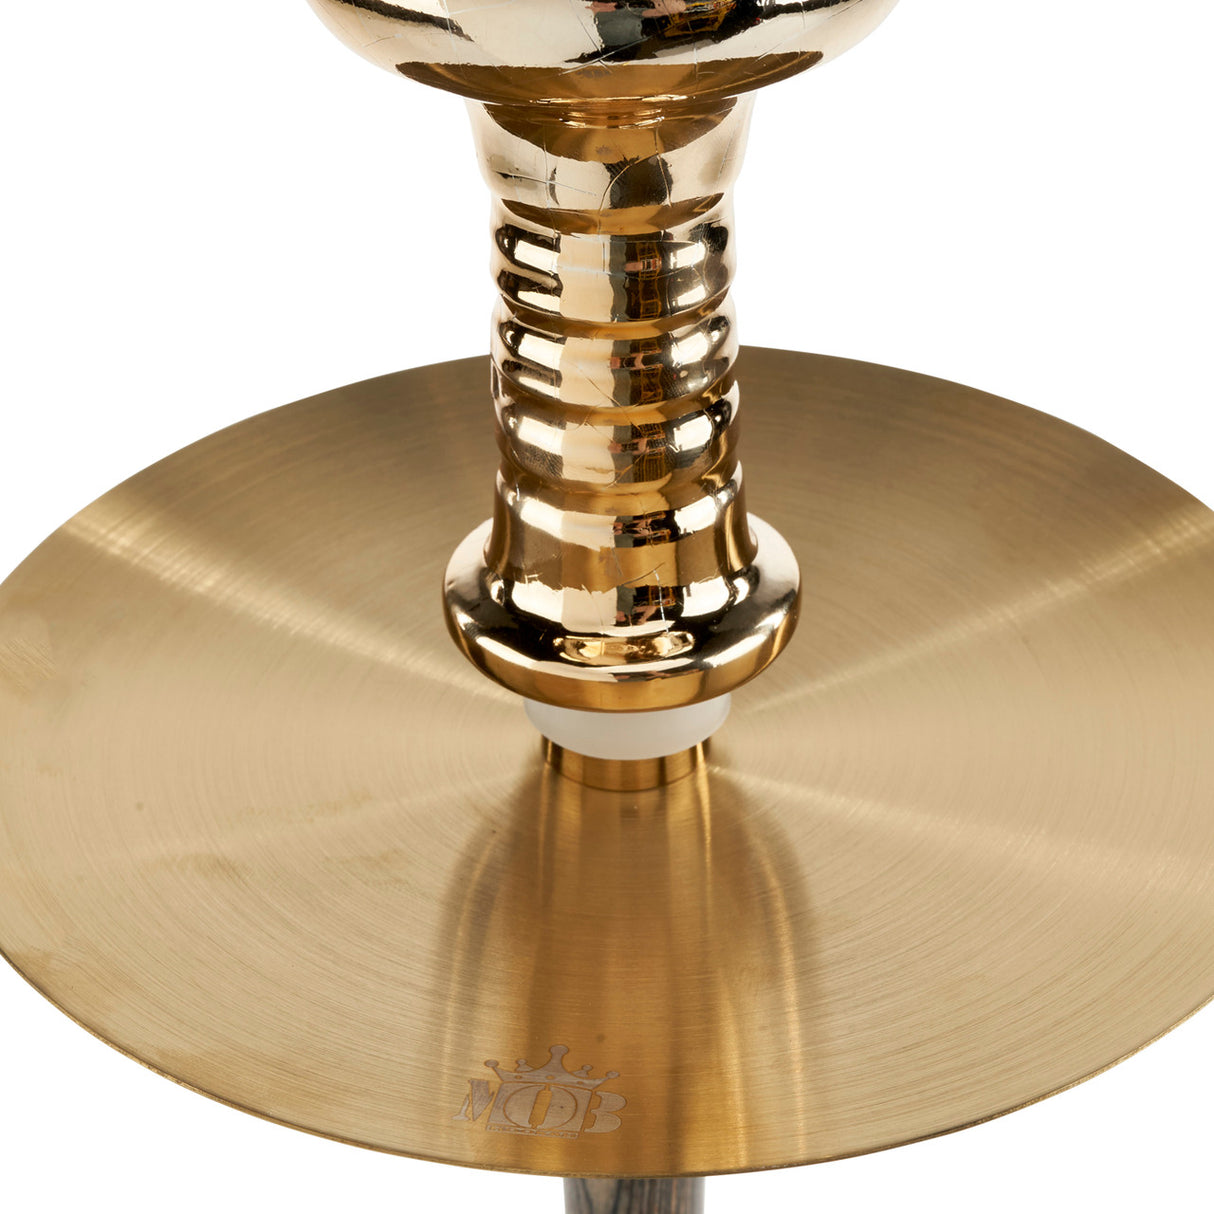 MOB Madera Hookah Gold Stainless Steel Tray